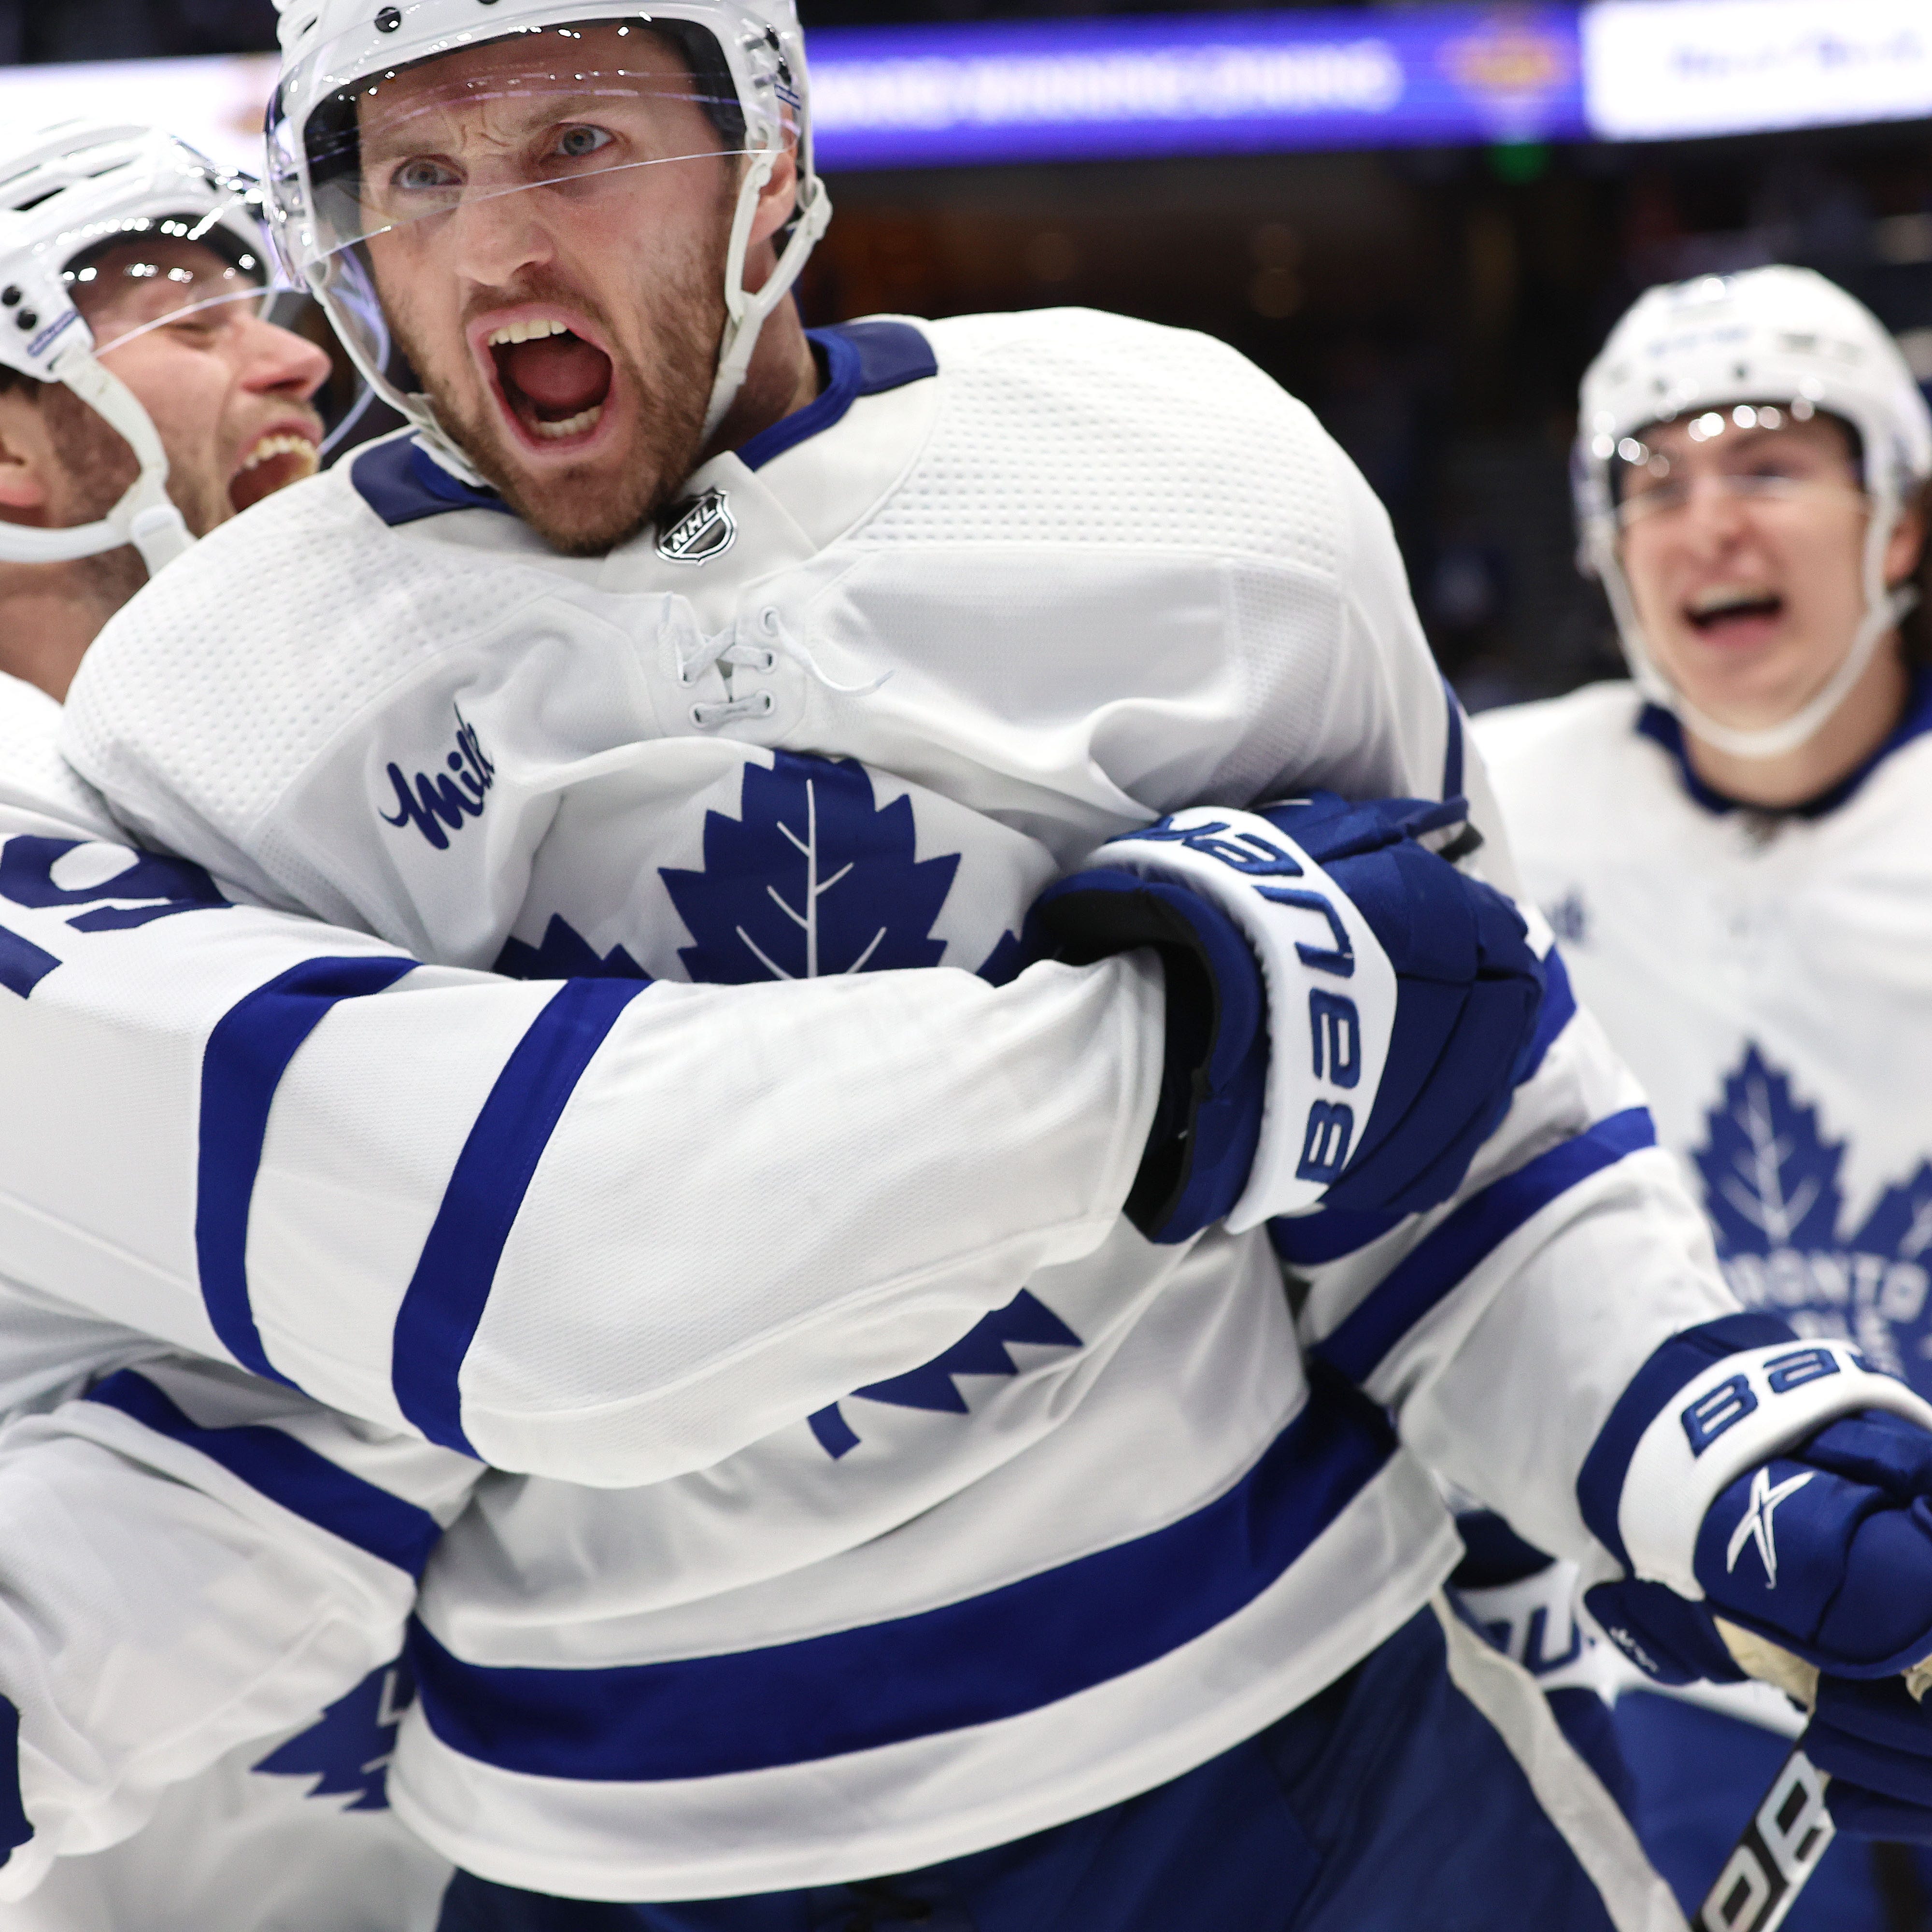 Toronto Maple Leafs center Alexander Kerfoot celebrates  his overtime goal in Game 4 against the Tampa Bay Lightning.